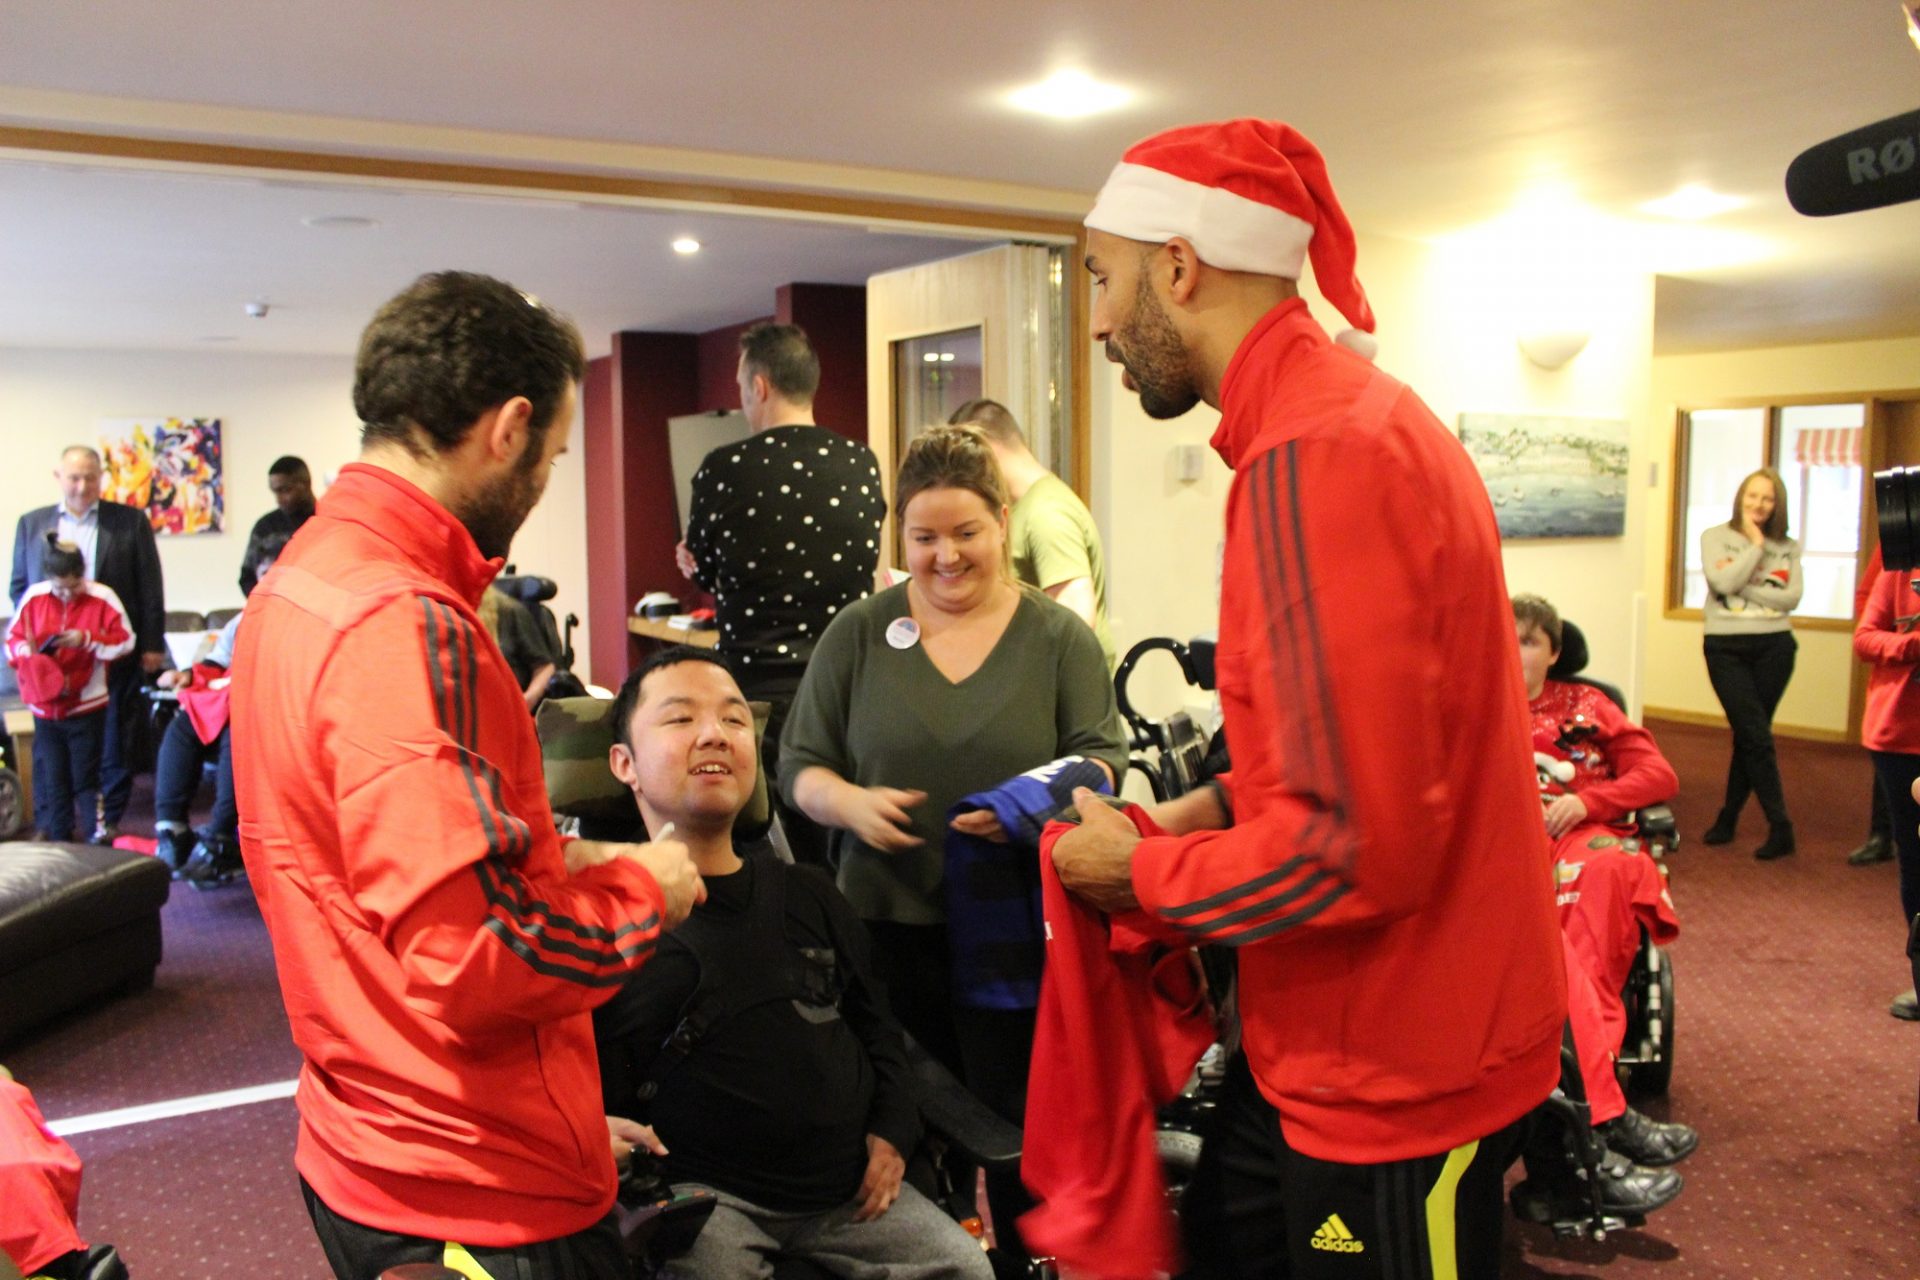 Manchester United players at Francis House